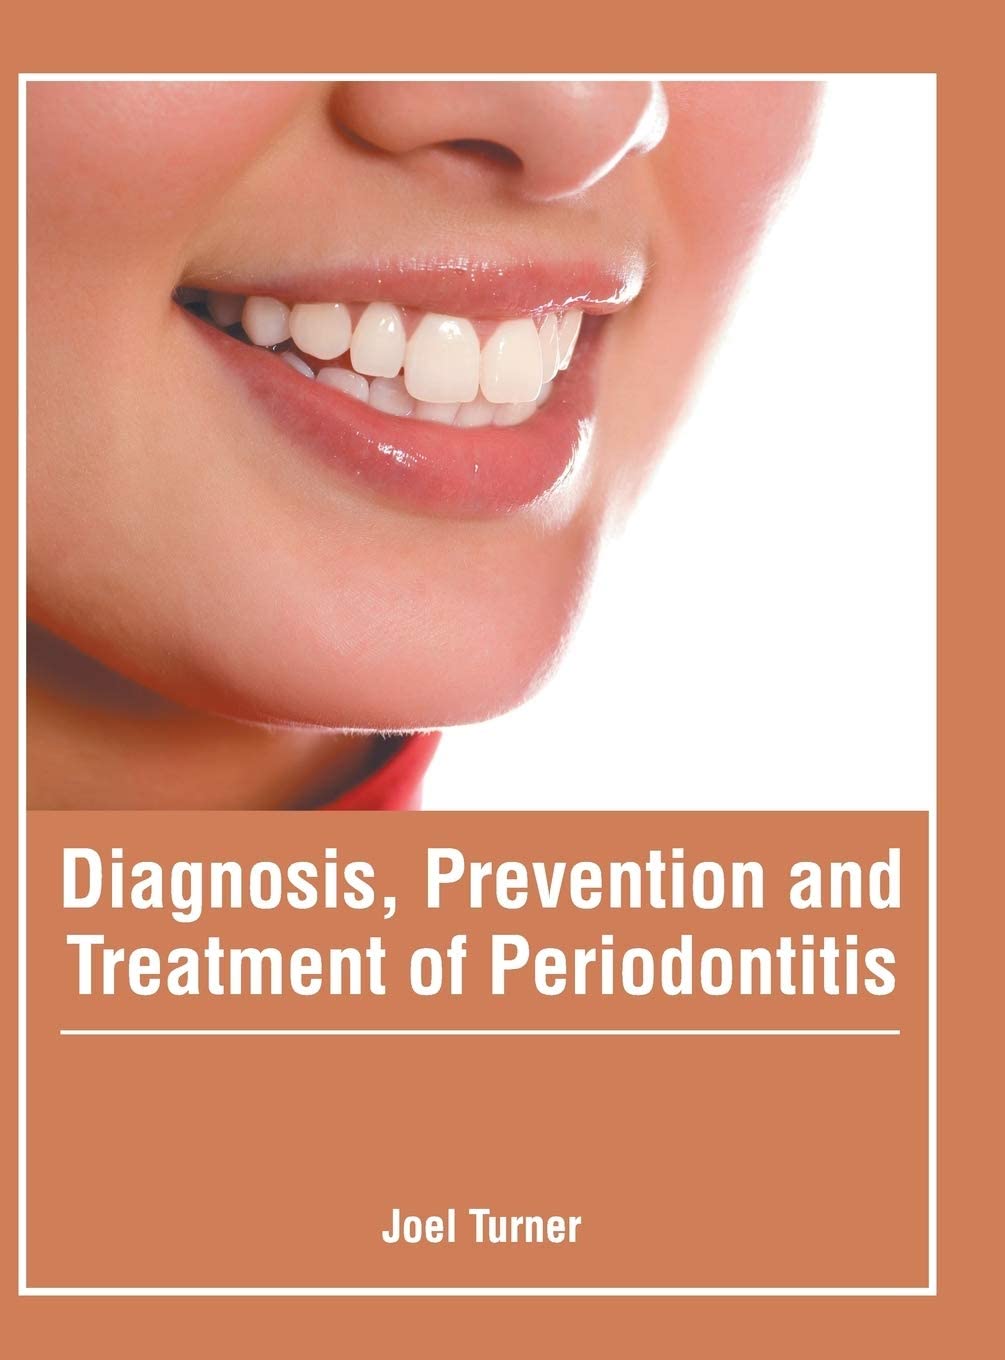 Diagnosis, Prevention and Treatment of Periodontitis